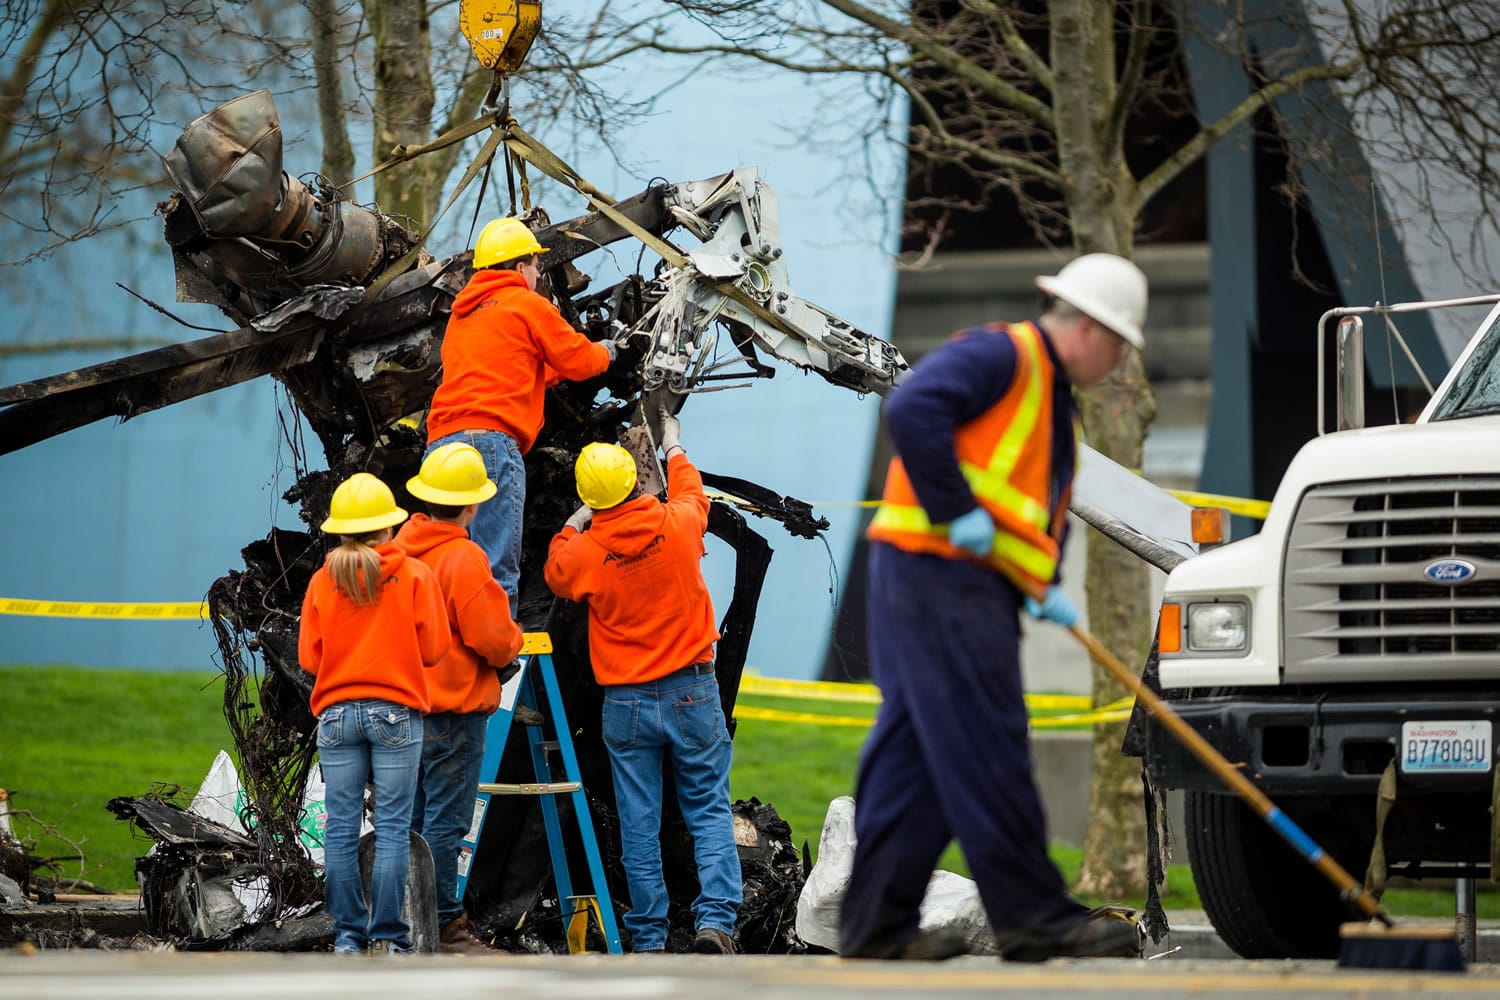 Crews move twisted and burned rotors from the scene where a news helicopter crashed into a street and burst into flames Tuesday near Seattle's Space Needle, killing two people on board, badly injuring a man in a car and sending plumes of black smoke over the city during the morning commute.